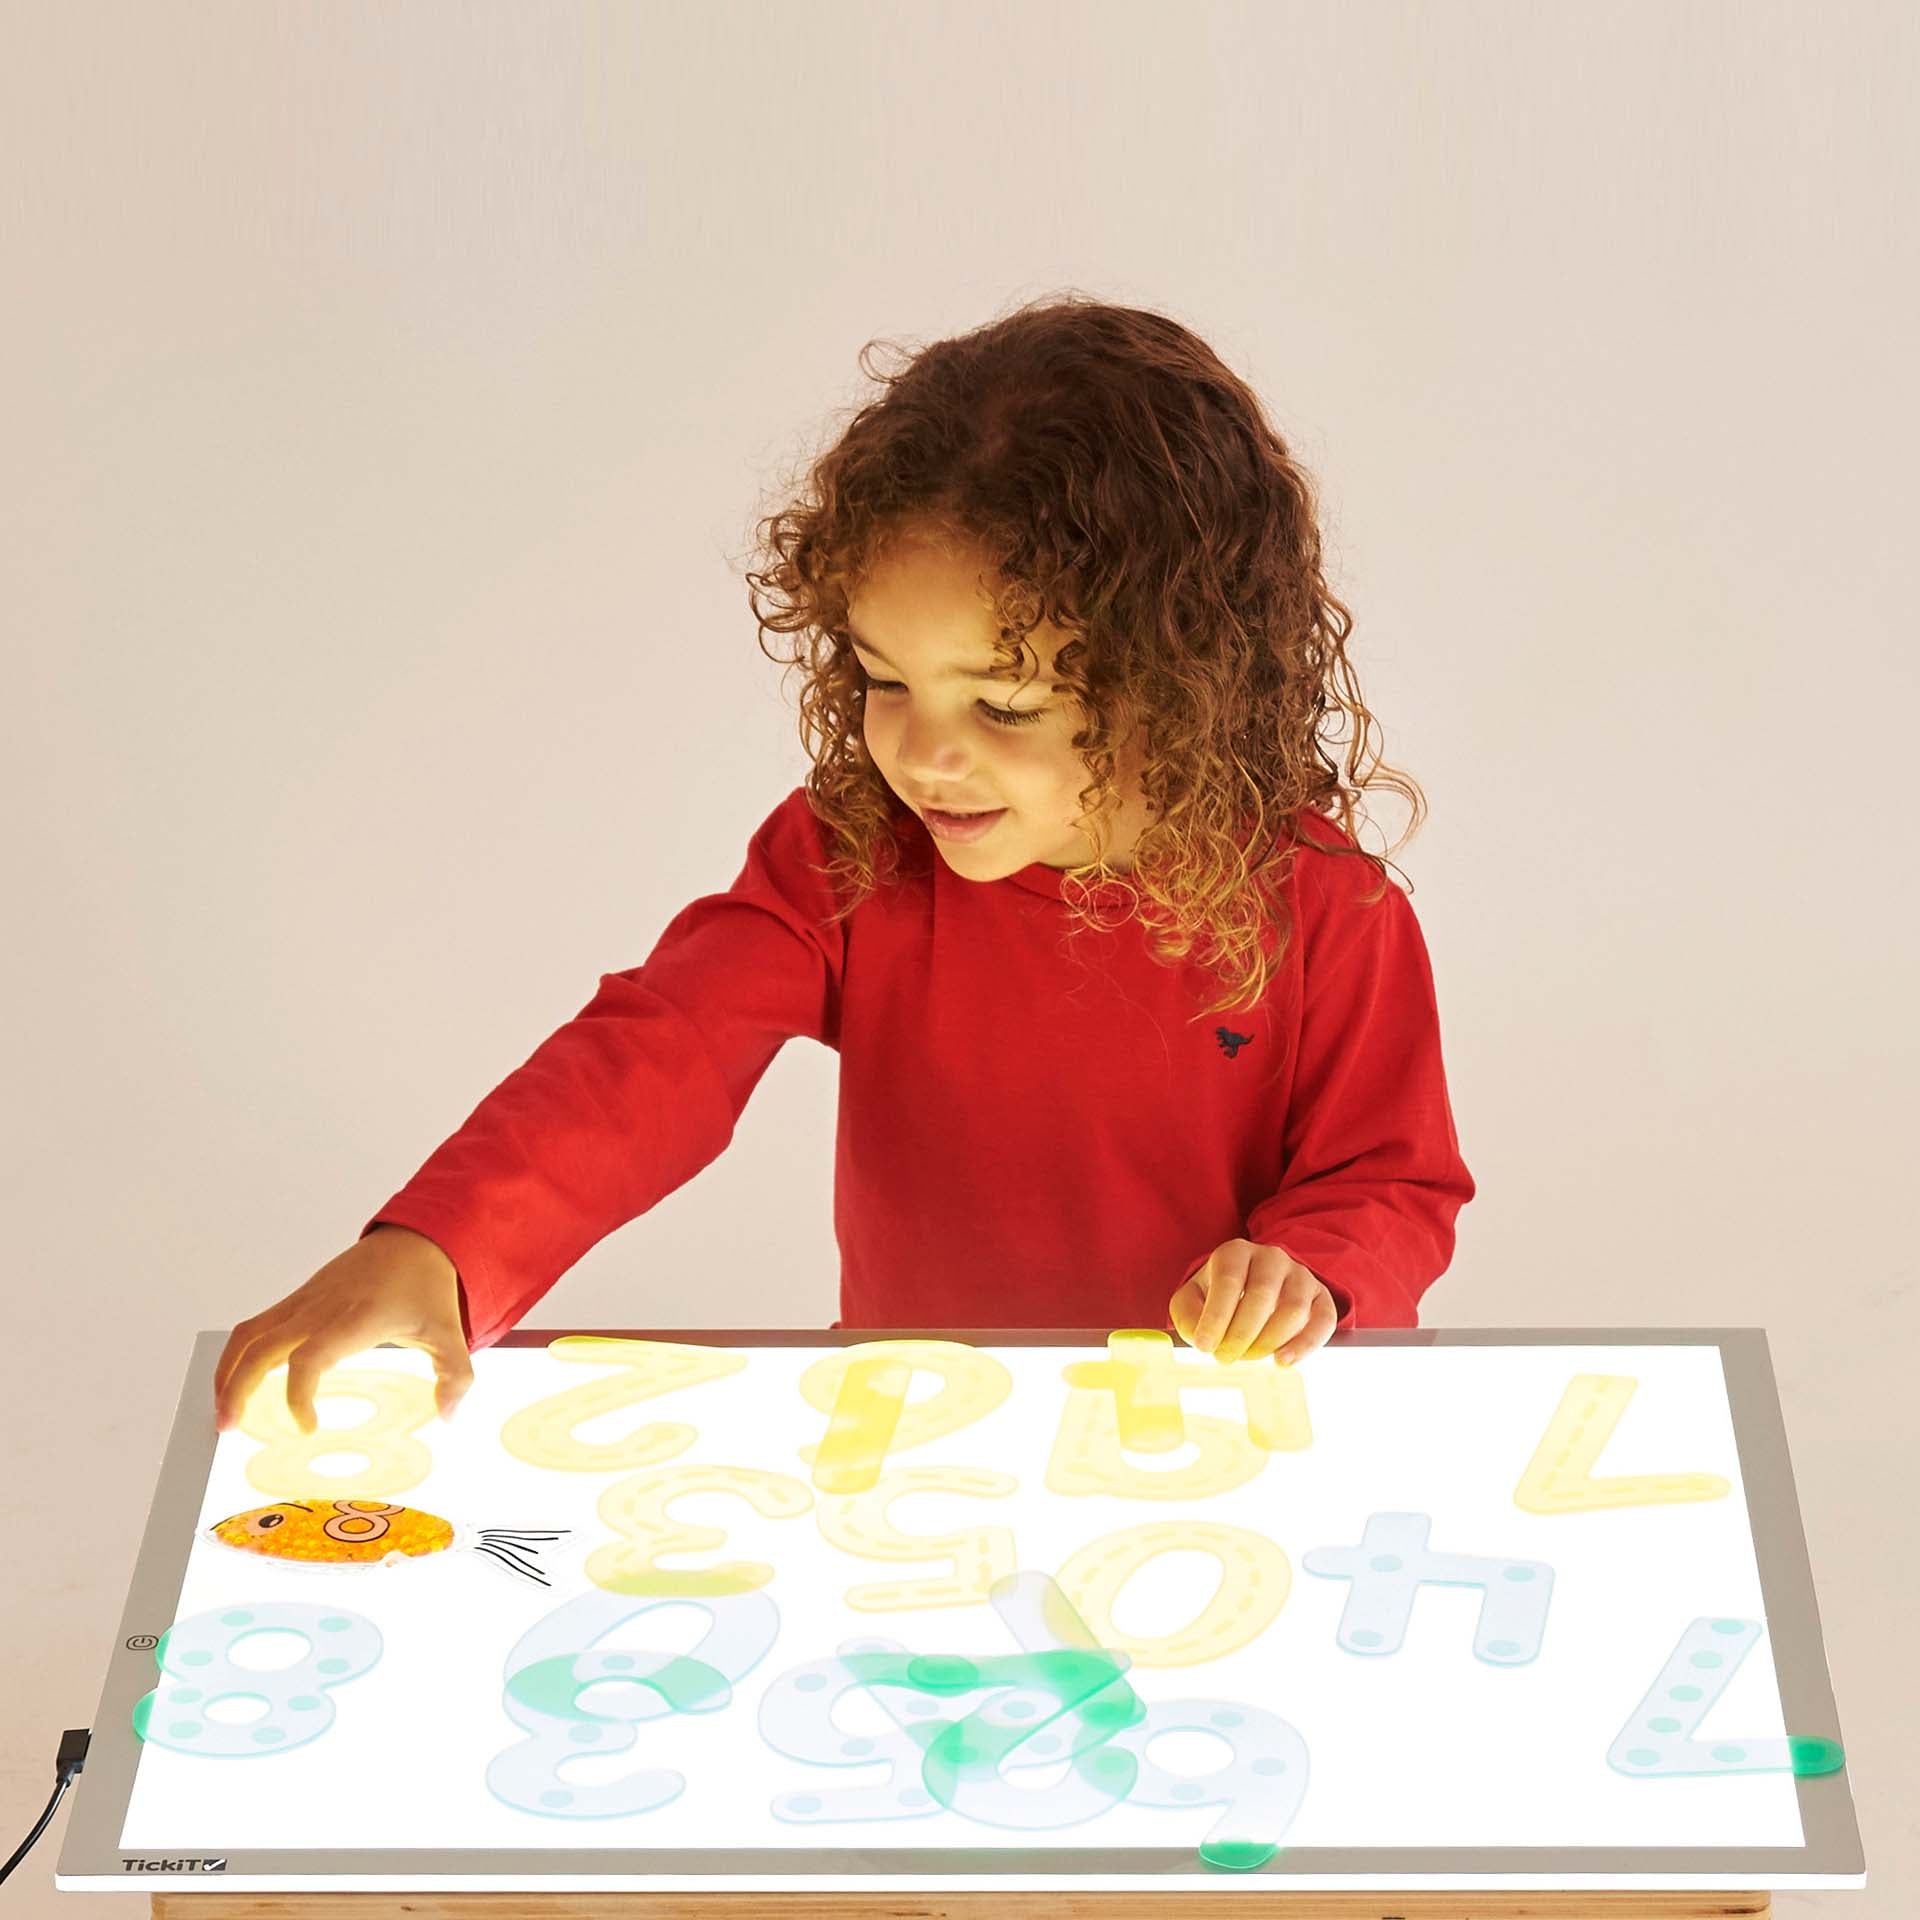 TickIT A3 Light Panel, Our TickIT A3 Light Panels are an essential and versatile cross-curricular resource. With a new anti-trip magnetic connector and 3 light level settings they provide a cool, clean, bright illuminated background and are ideal for the investigation of light, colour and shape, or for focused group work in a wide range of subjects. Slimline and with rounded edges, the panels are tough, portable and easy to wipe clean. Simple operation with a lock function to prevent them being turned off u